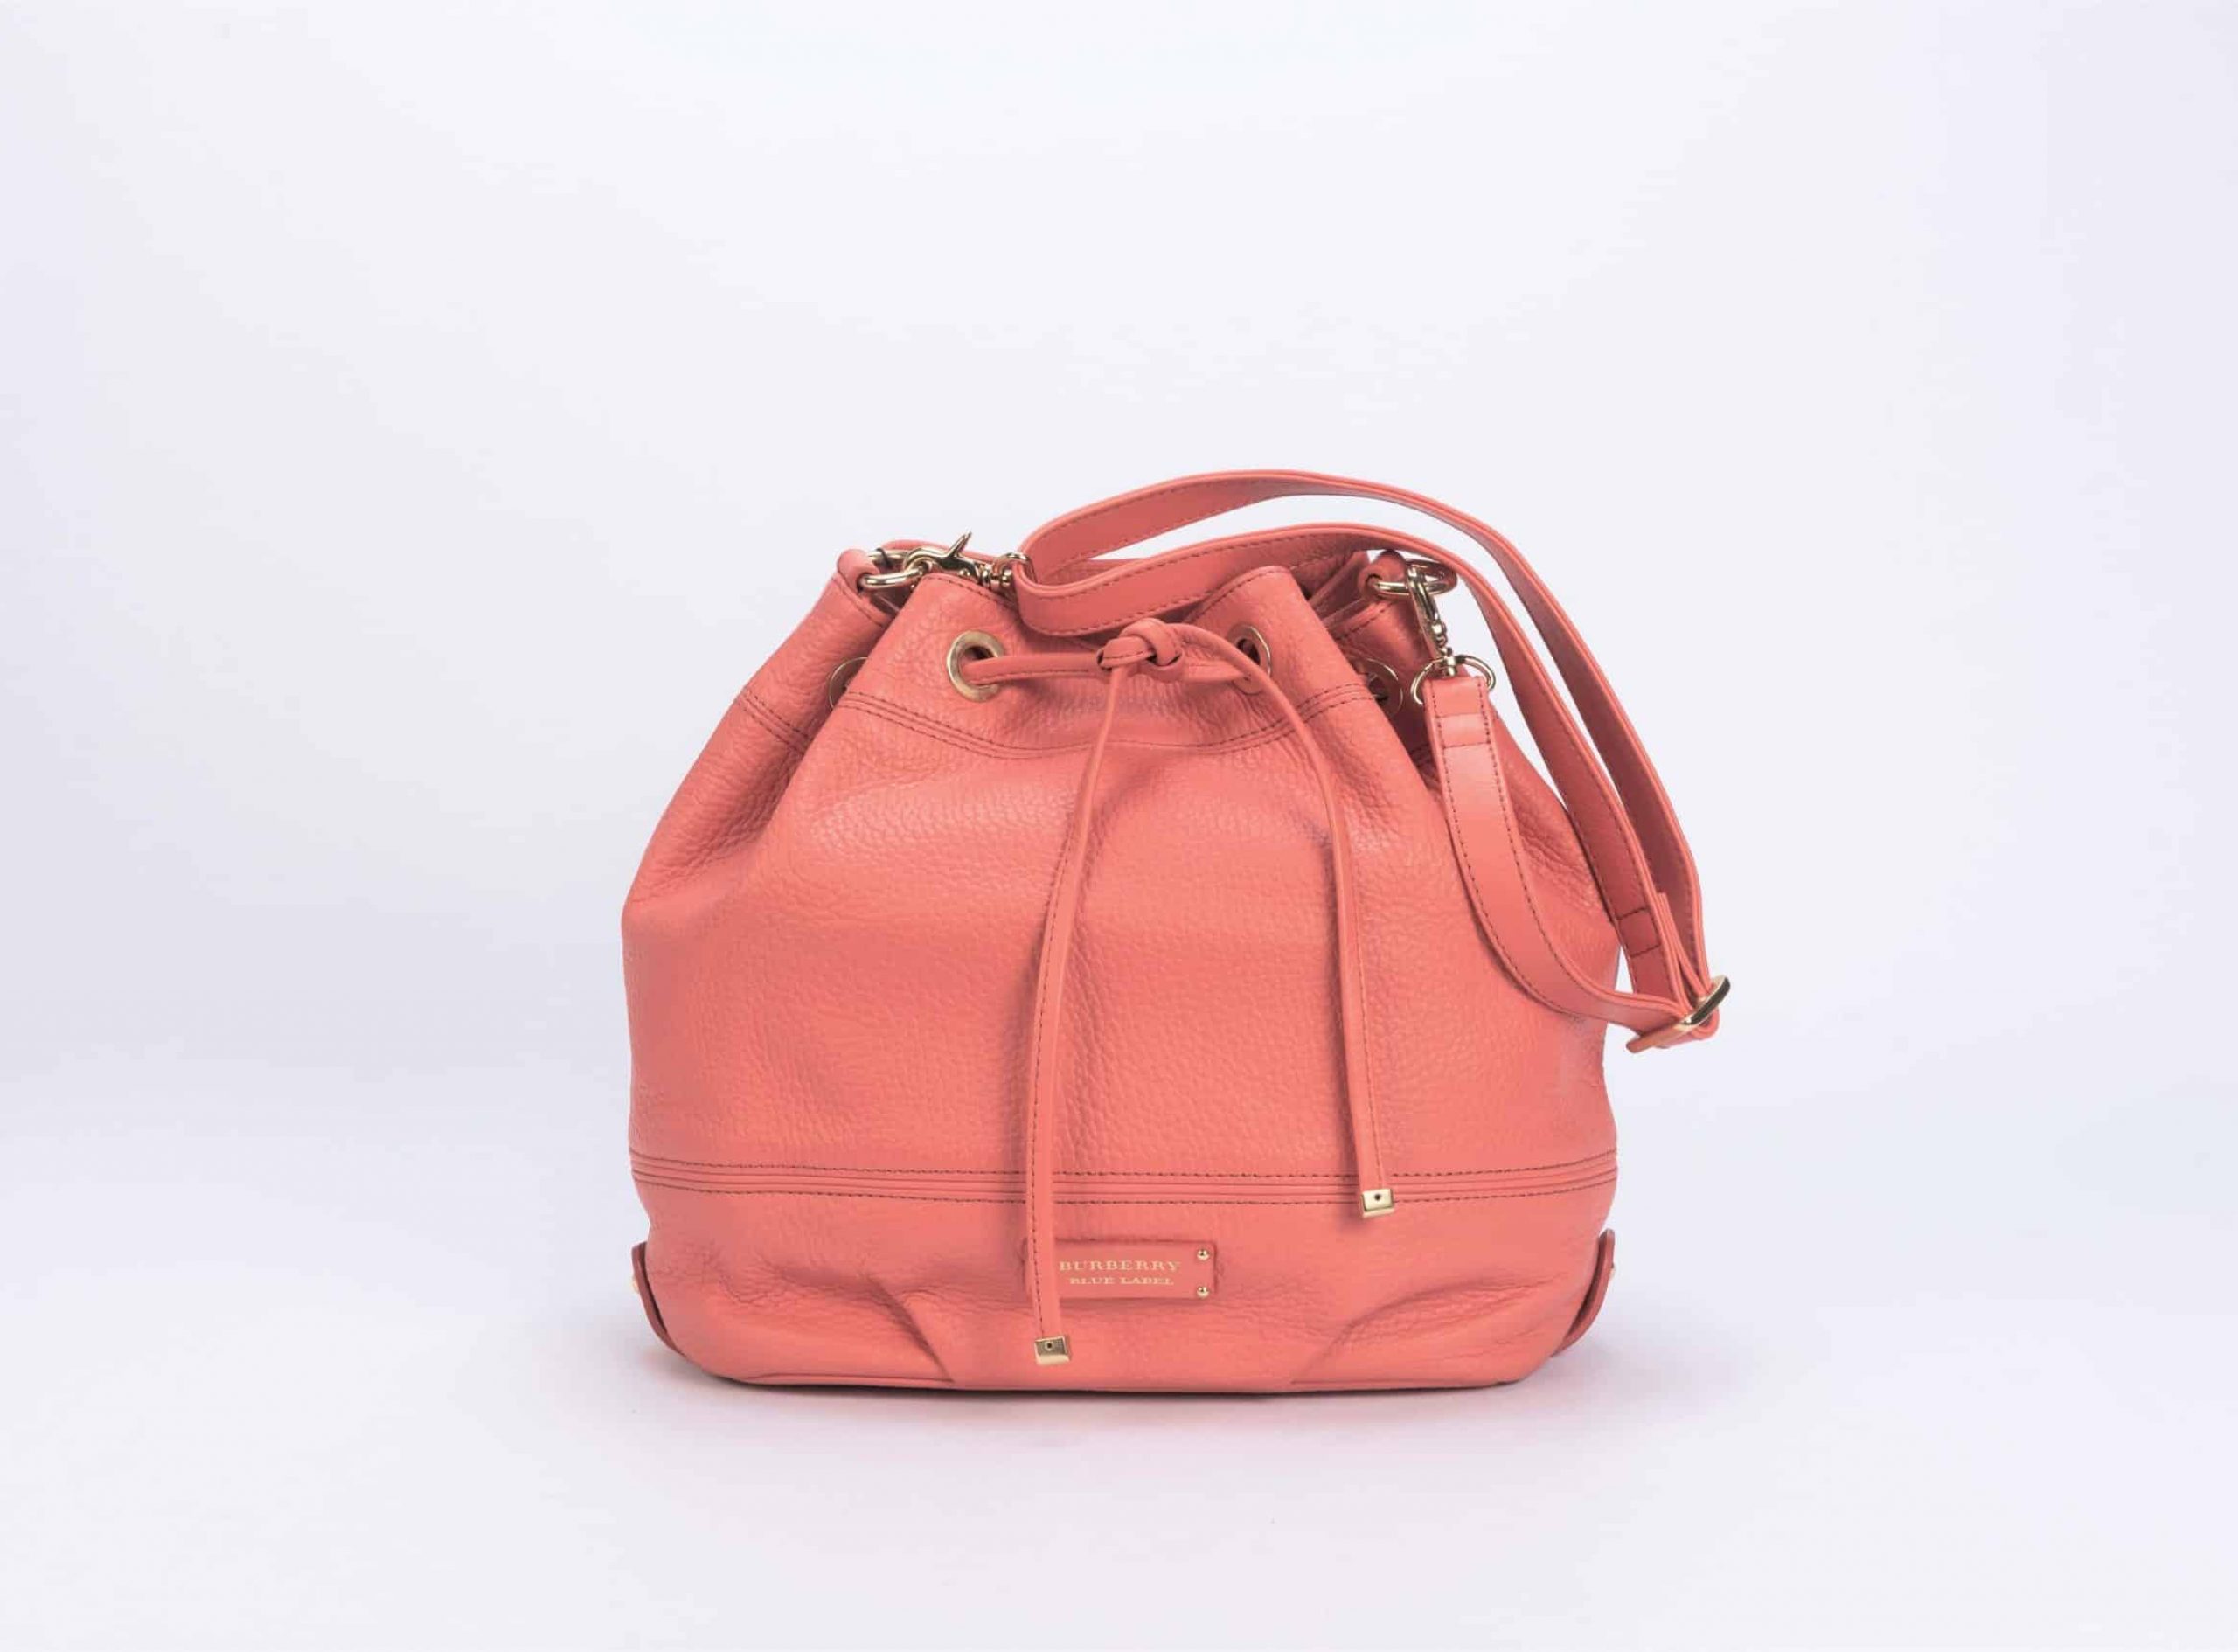 Burberry Blue Label Grain Sling Bag in Coral Peach - 1